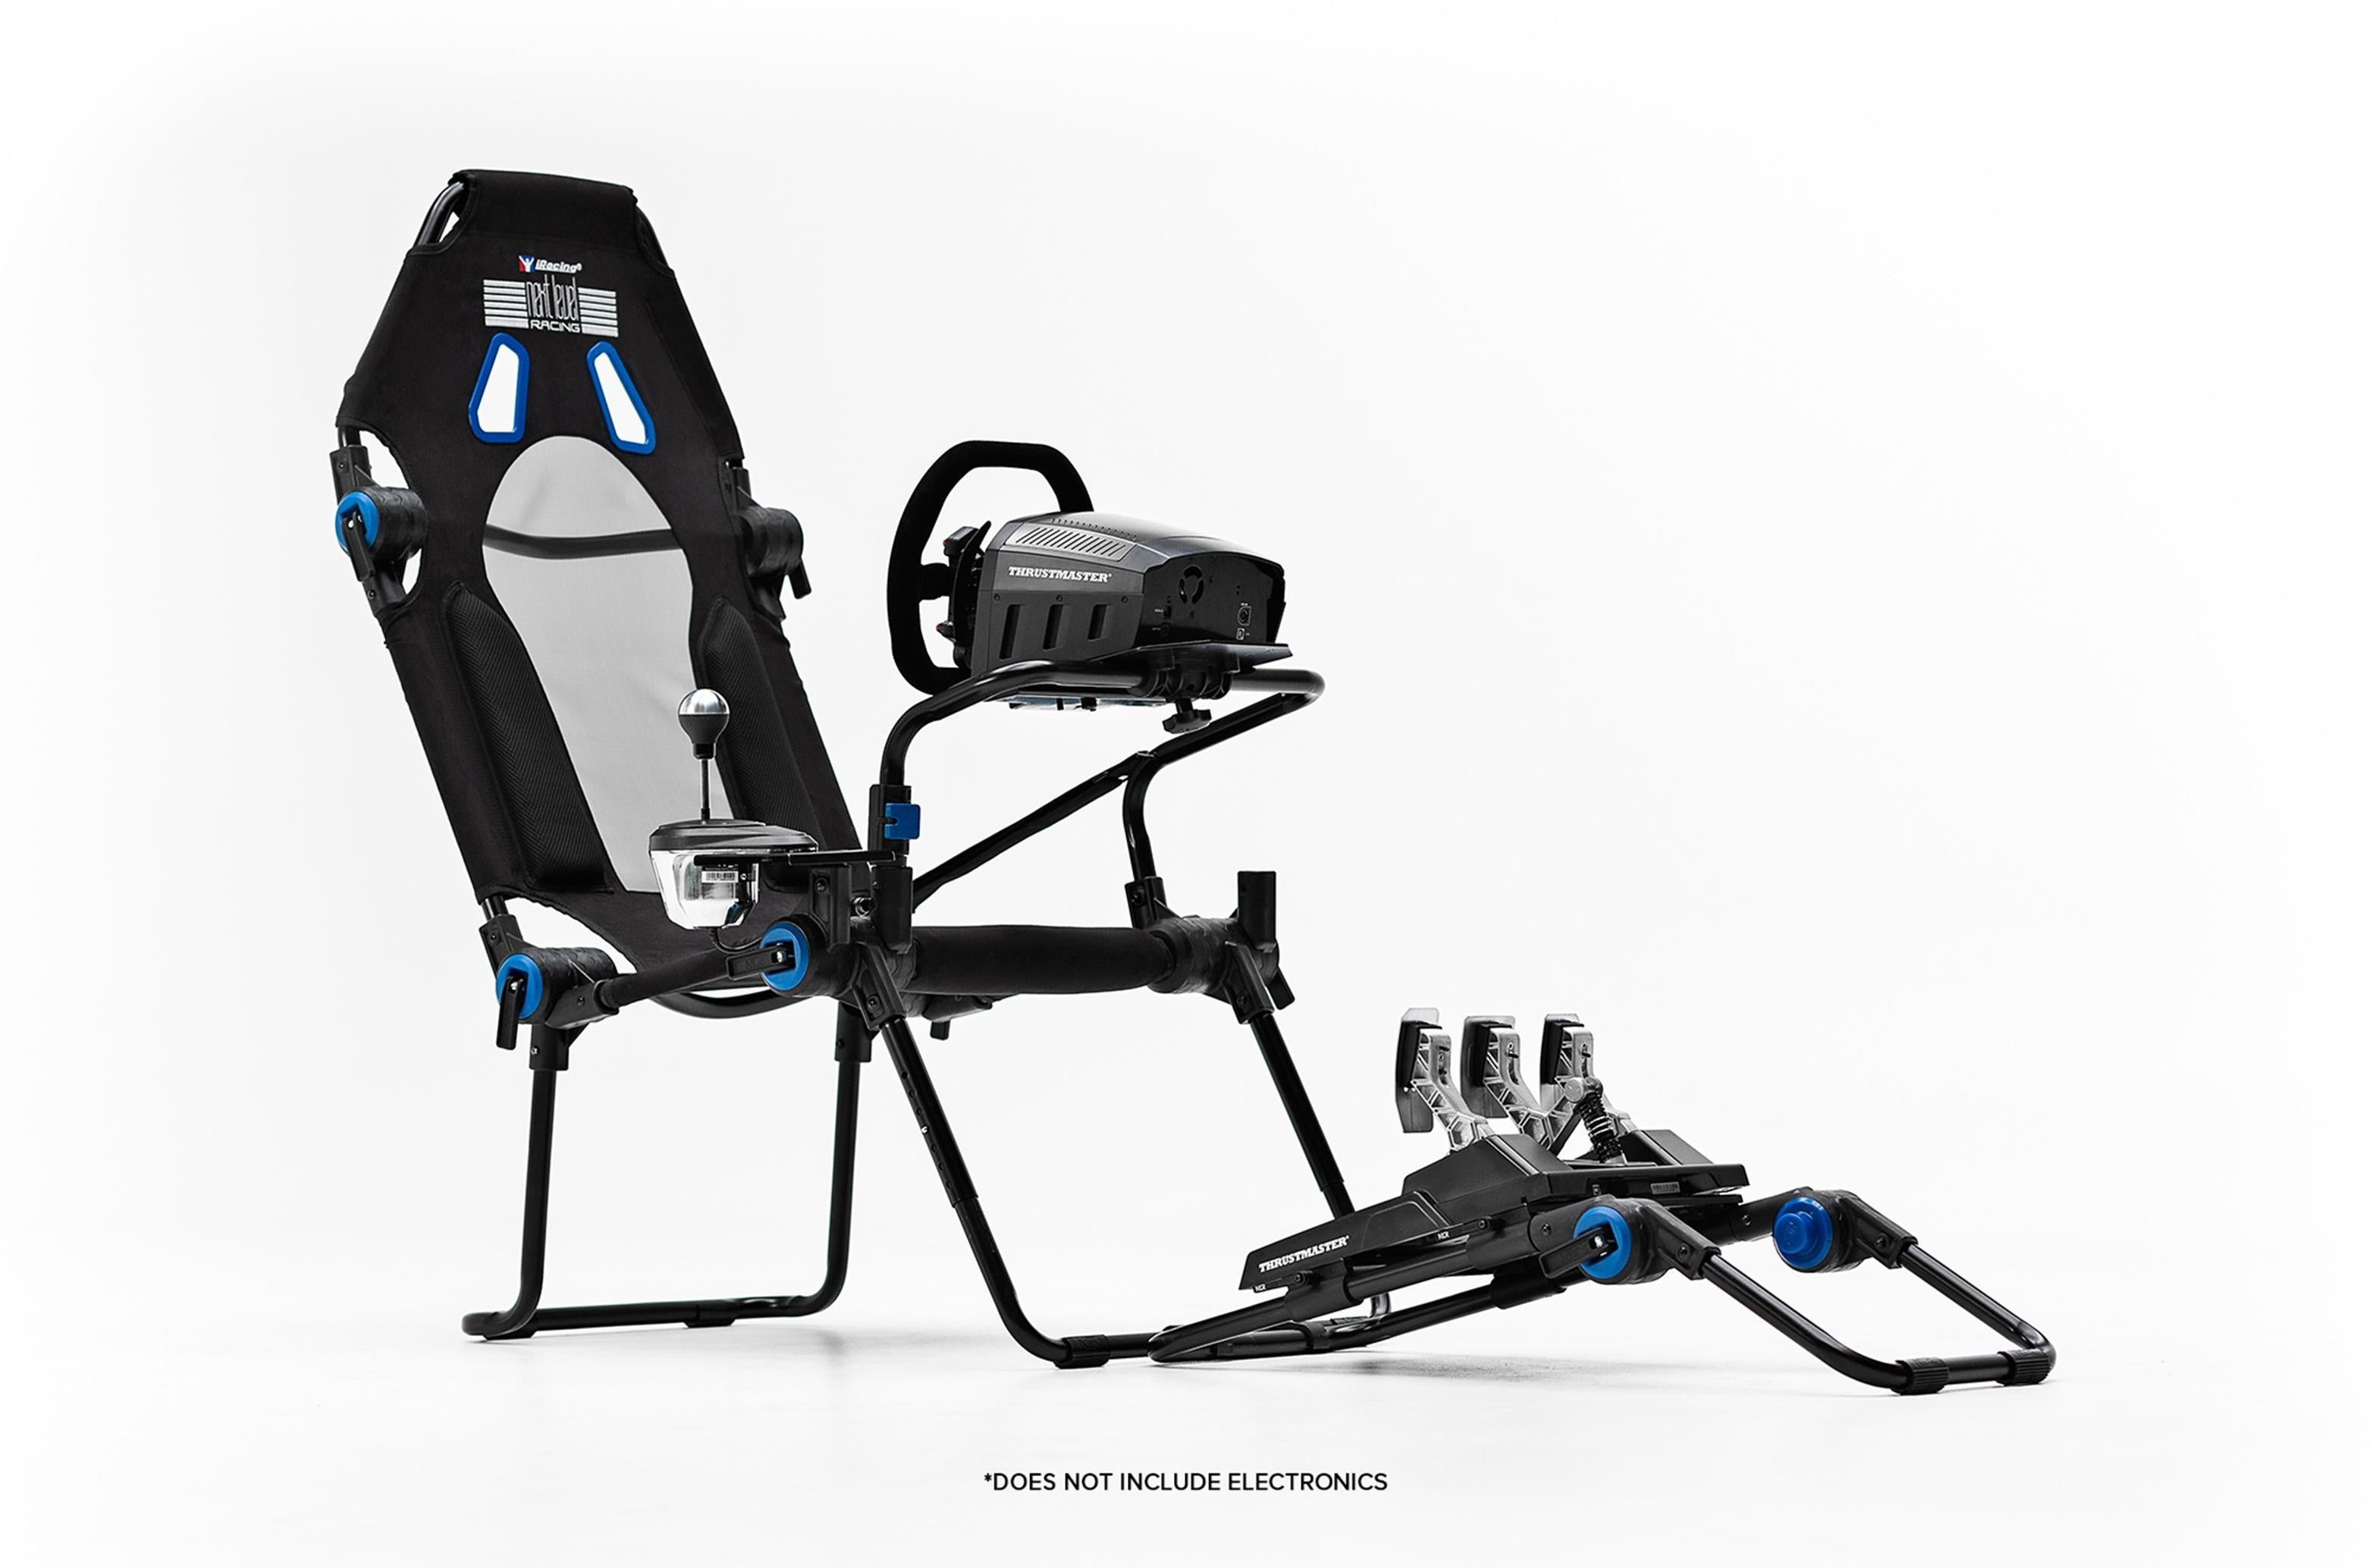 Next Level Racing F-GT Lite Formula and GT Foldable Simulator Cockpit iRacing Edition